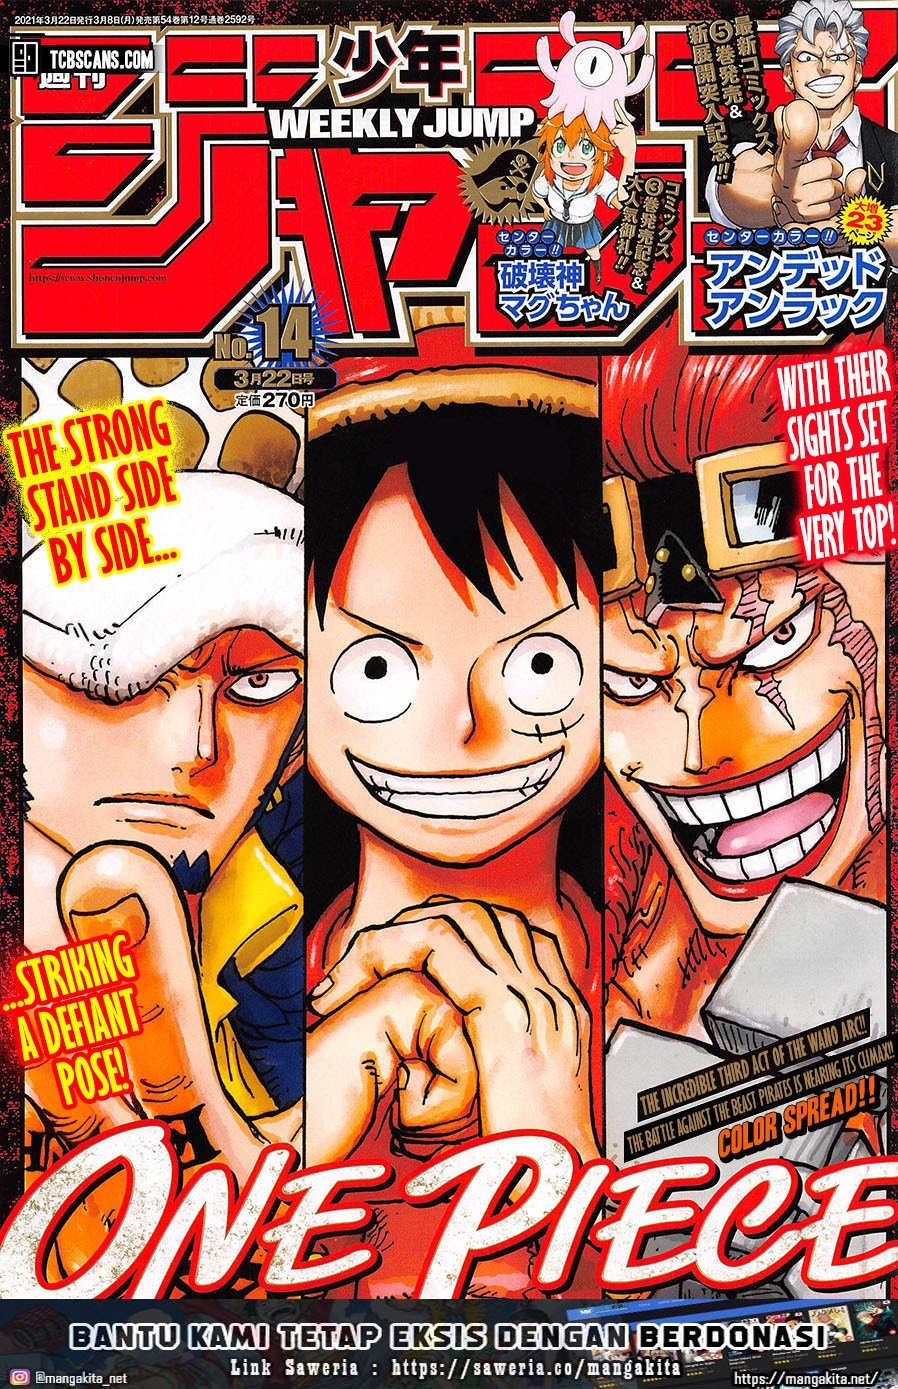 One Piece Chapter 1006 hq Image 1